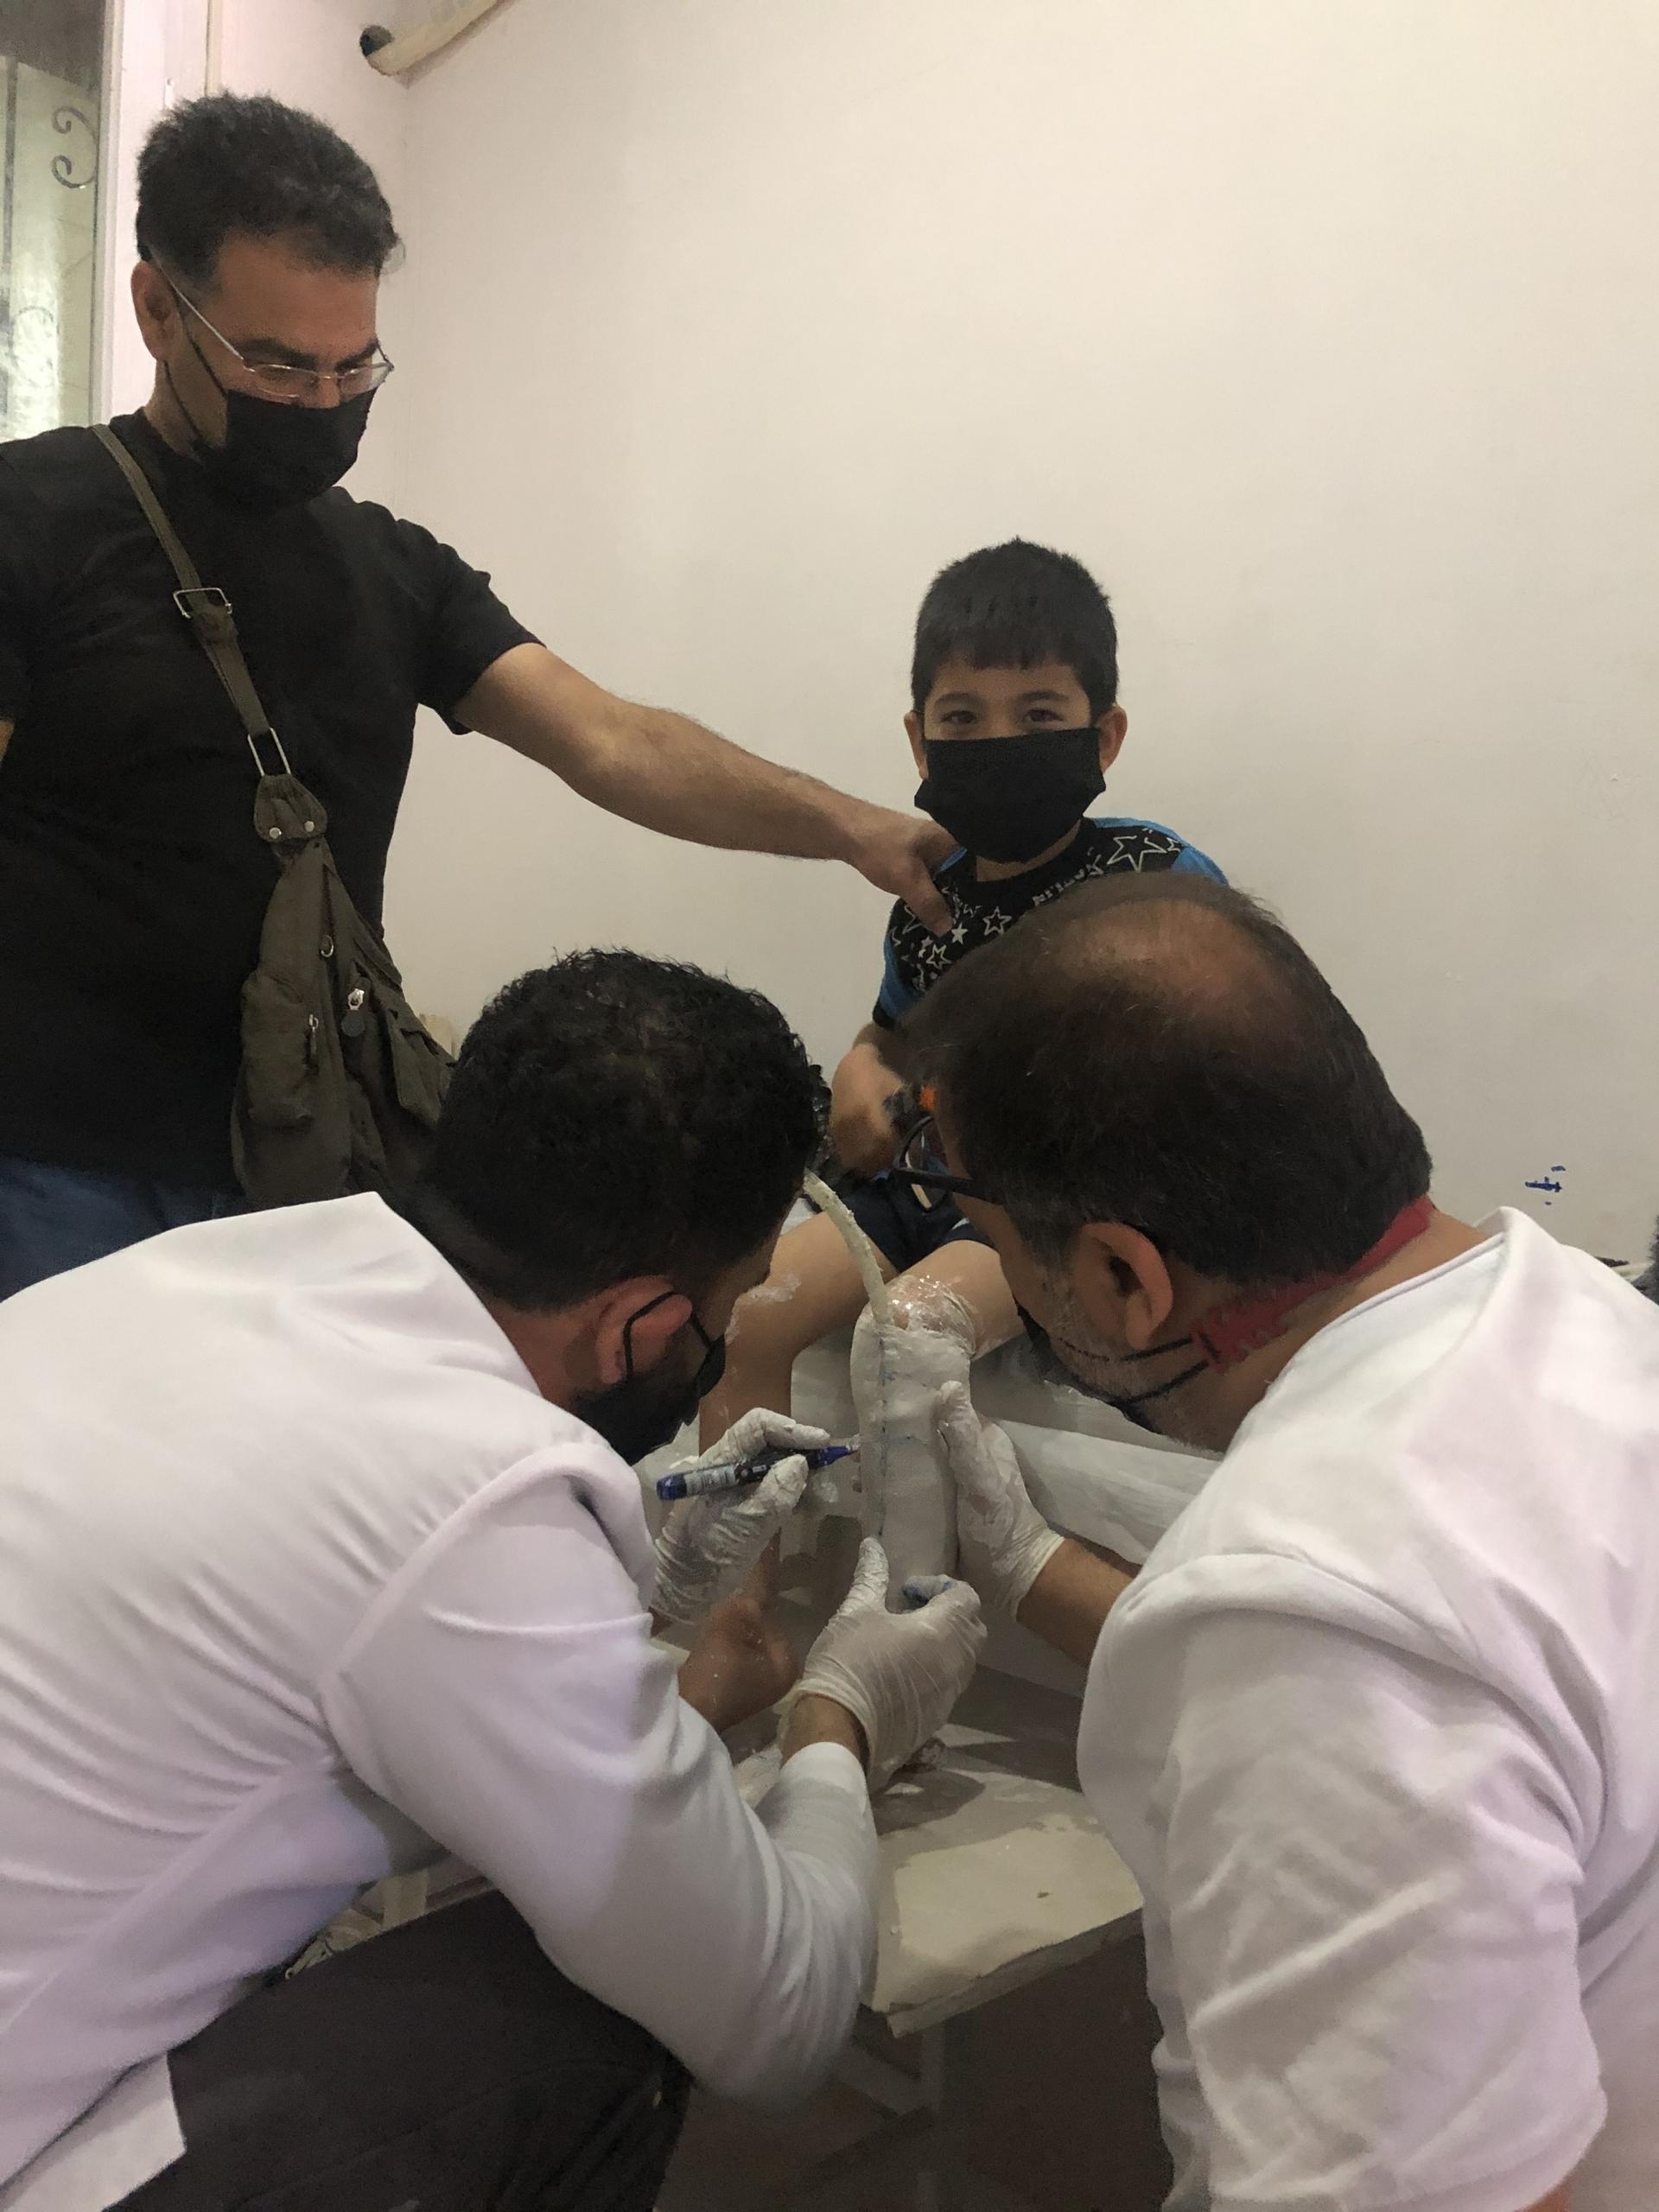 Mohamed al-Aweis (far left) said that his son, Jad, needed medical attention at birth but doctors urged him to leave immediately because there had been airstrikes nearby in recent days.